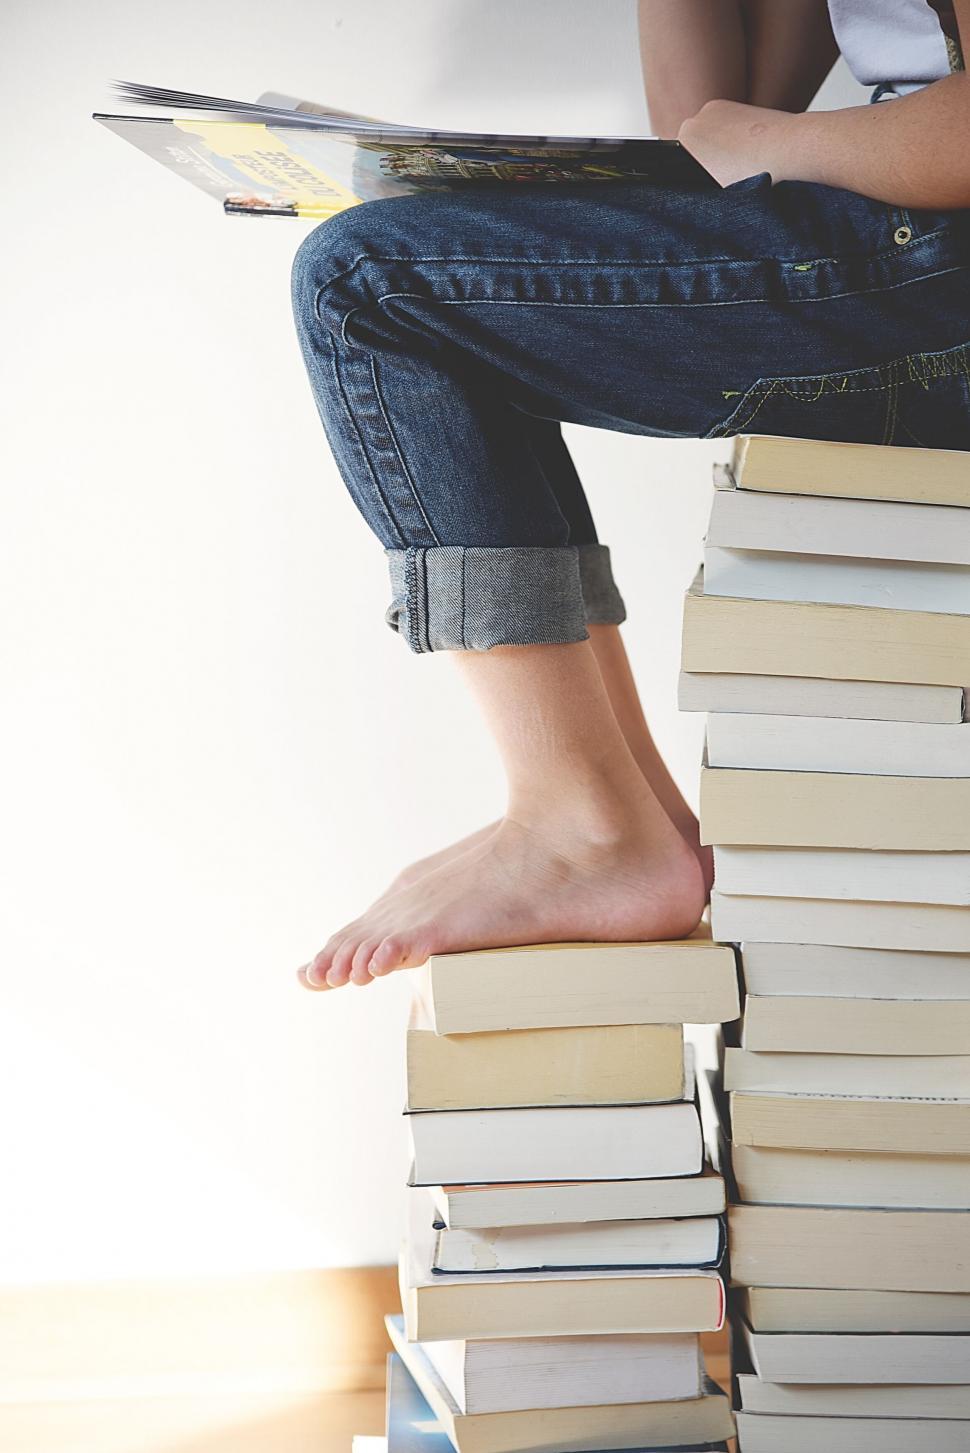 Free Image of Person reading a book on top of book pile 